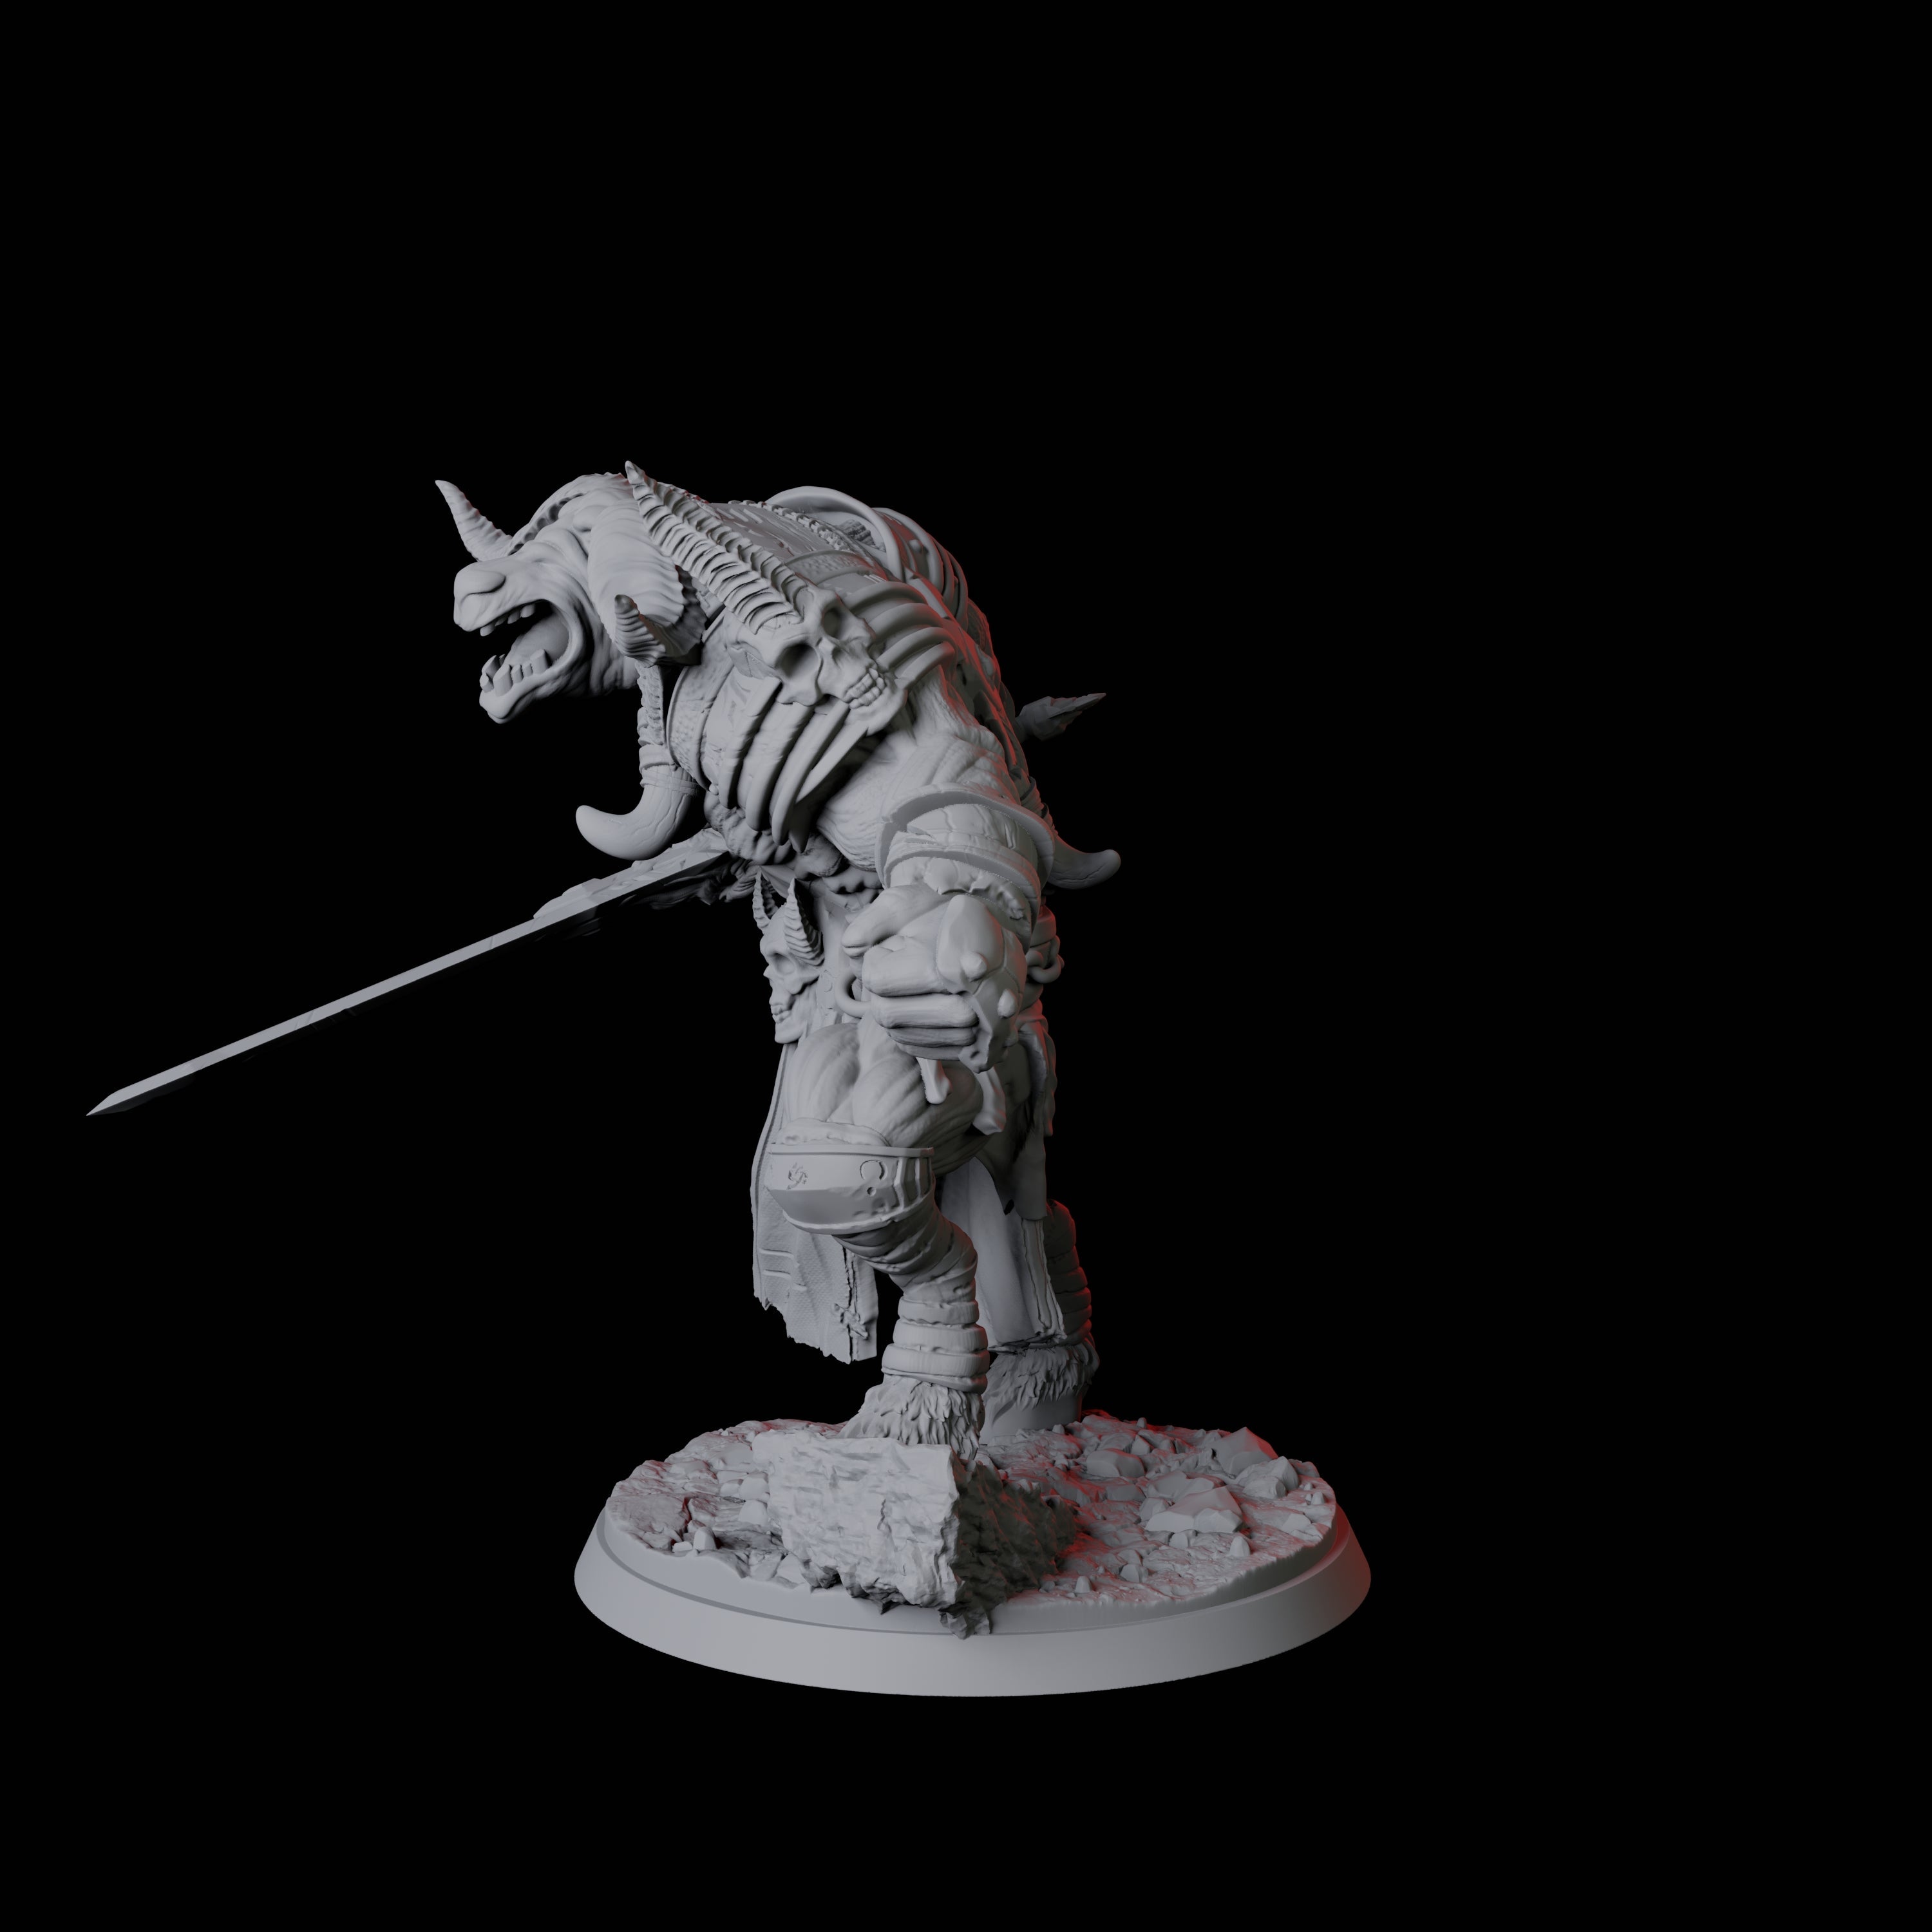 Roaring Yakfolk Fighter Miniature for Dungeons and Dragons, Pathfinder or other TTRPGs